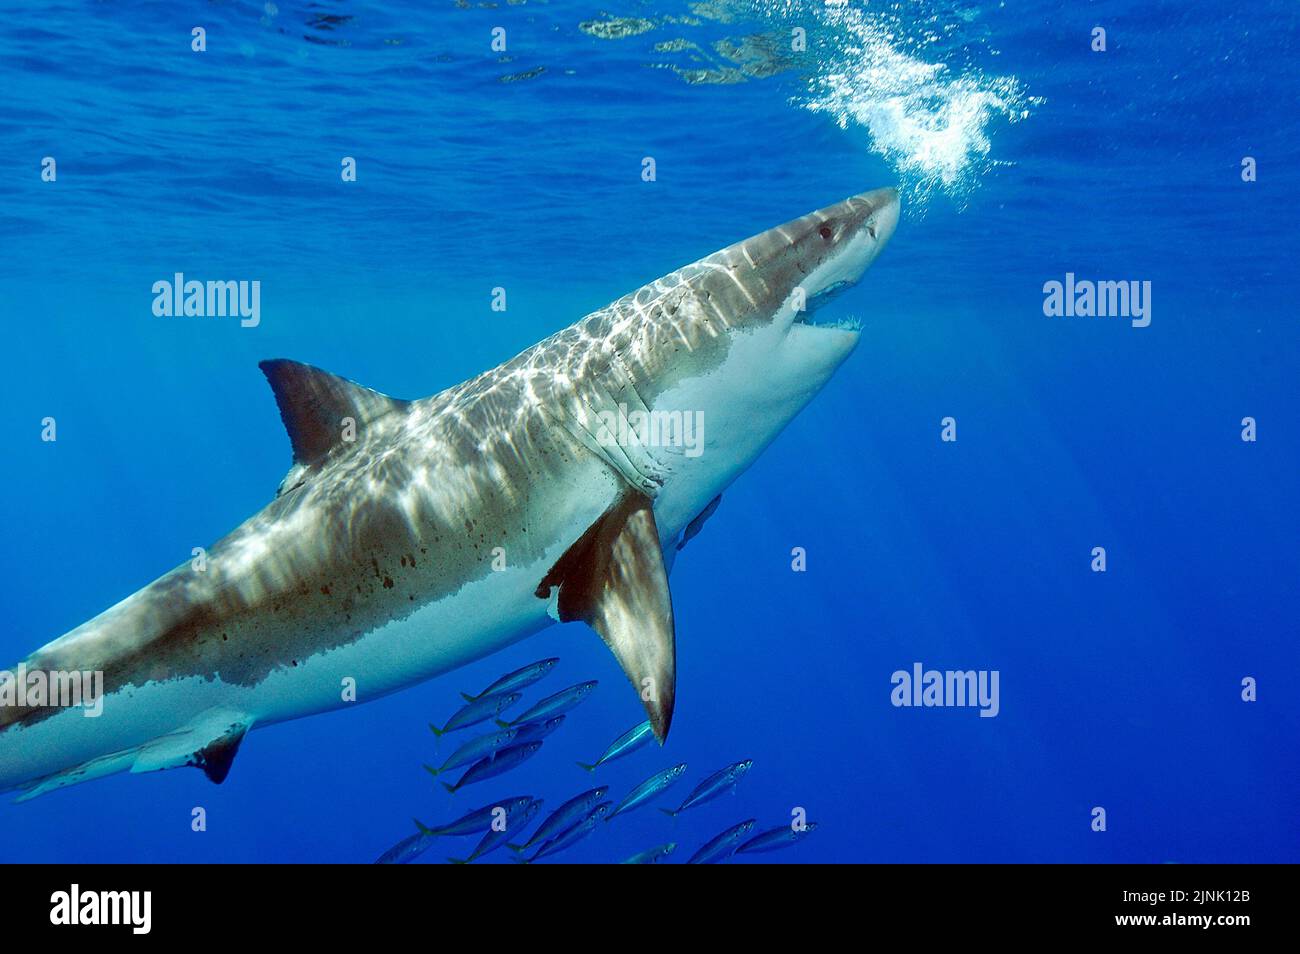 Great white shark (Carcharodon carcharias) in blue water, Guadalupe Island, Mexico, Stock Photo